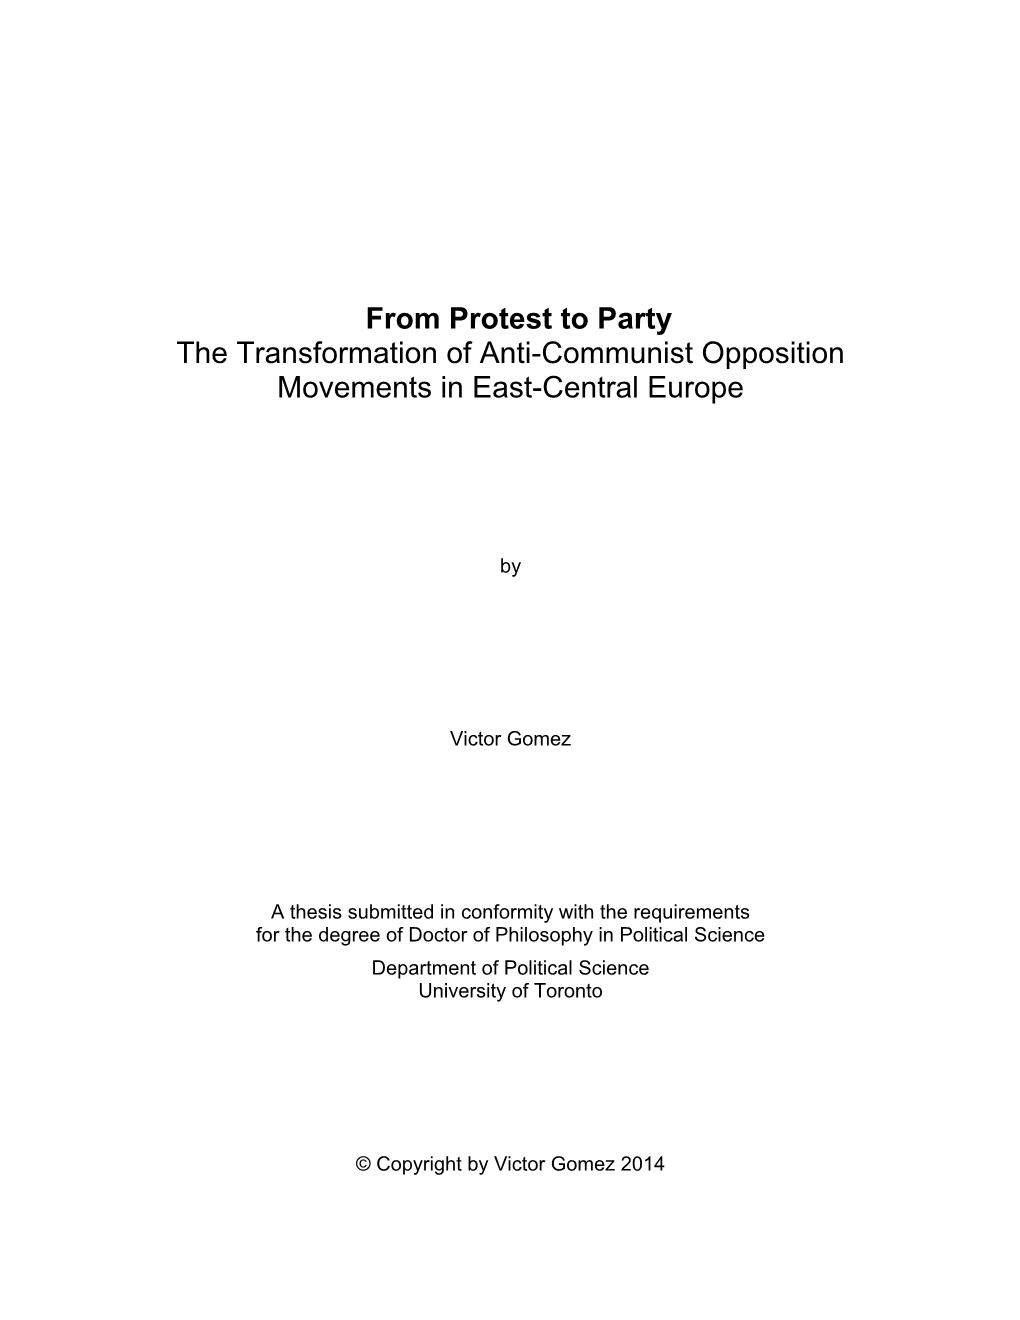 From Protest to Party the Transformation of Anti-Communist Opposition Movements in East-Central Europe